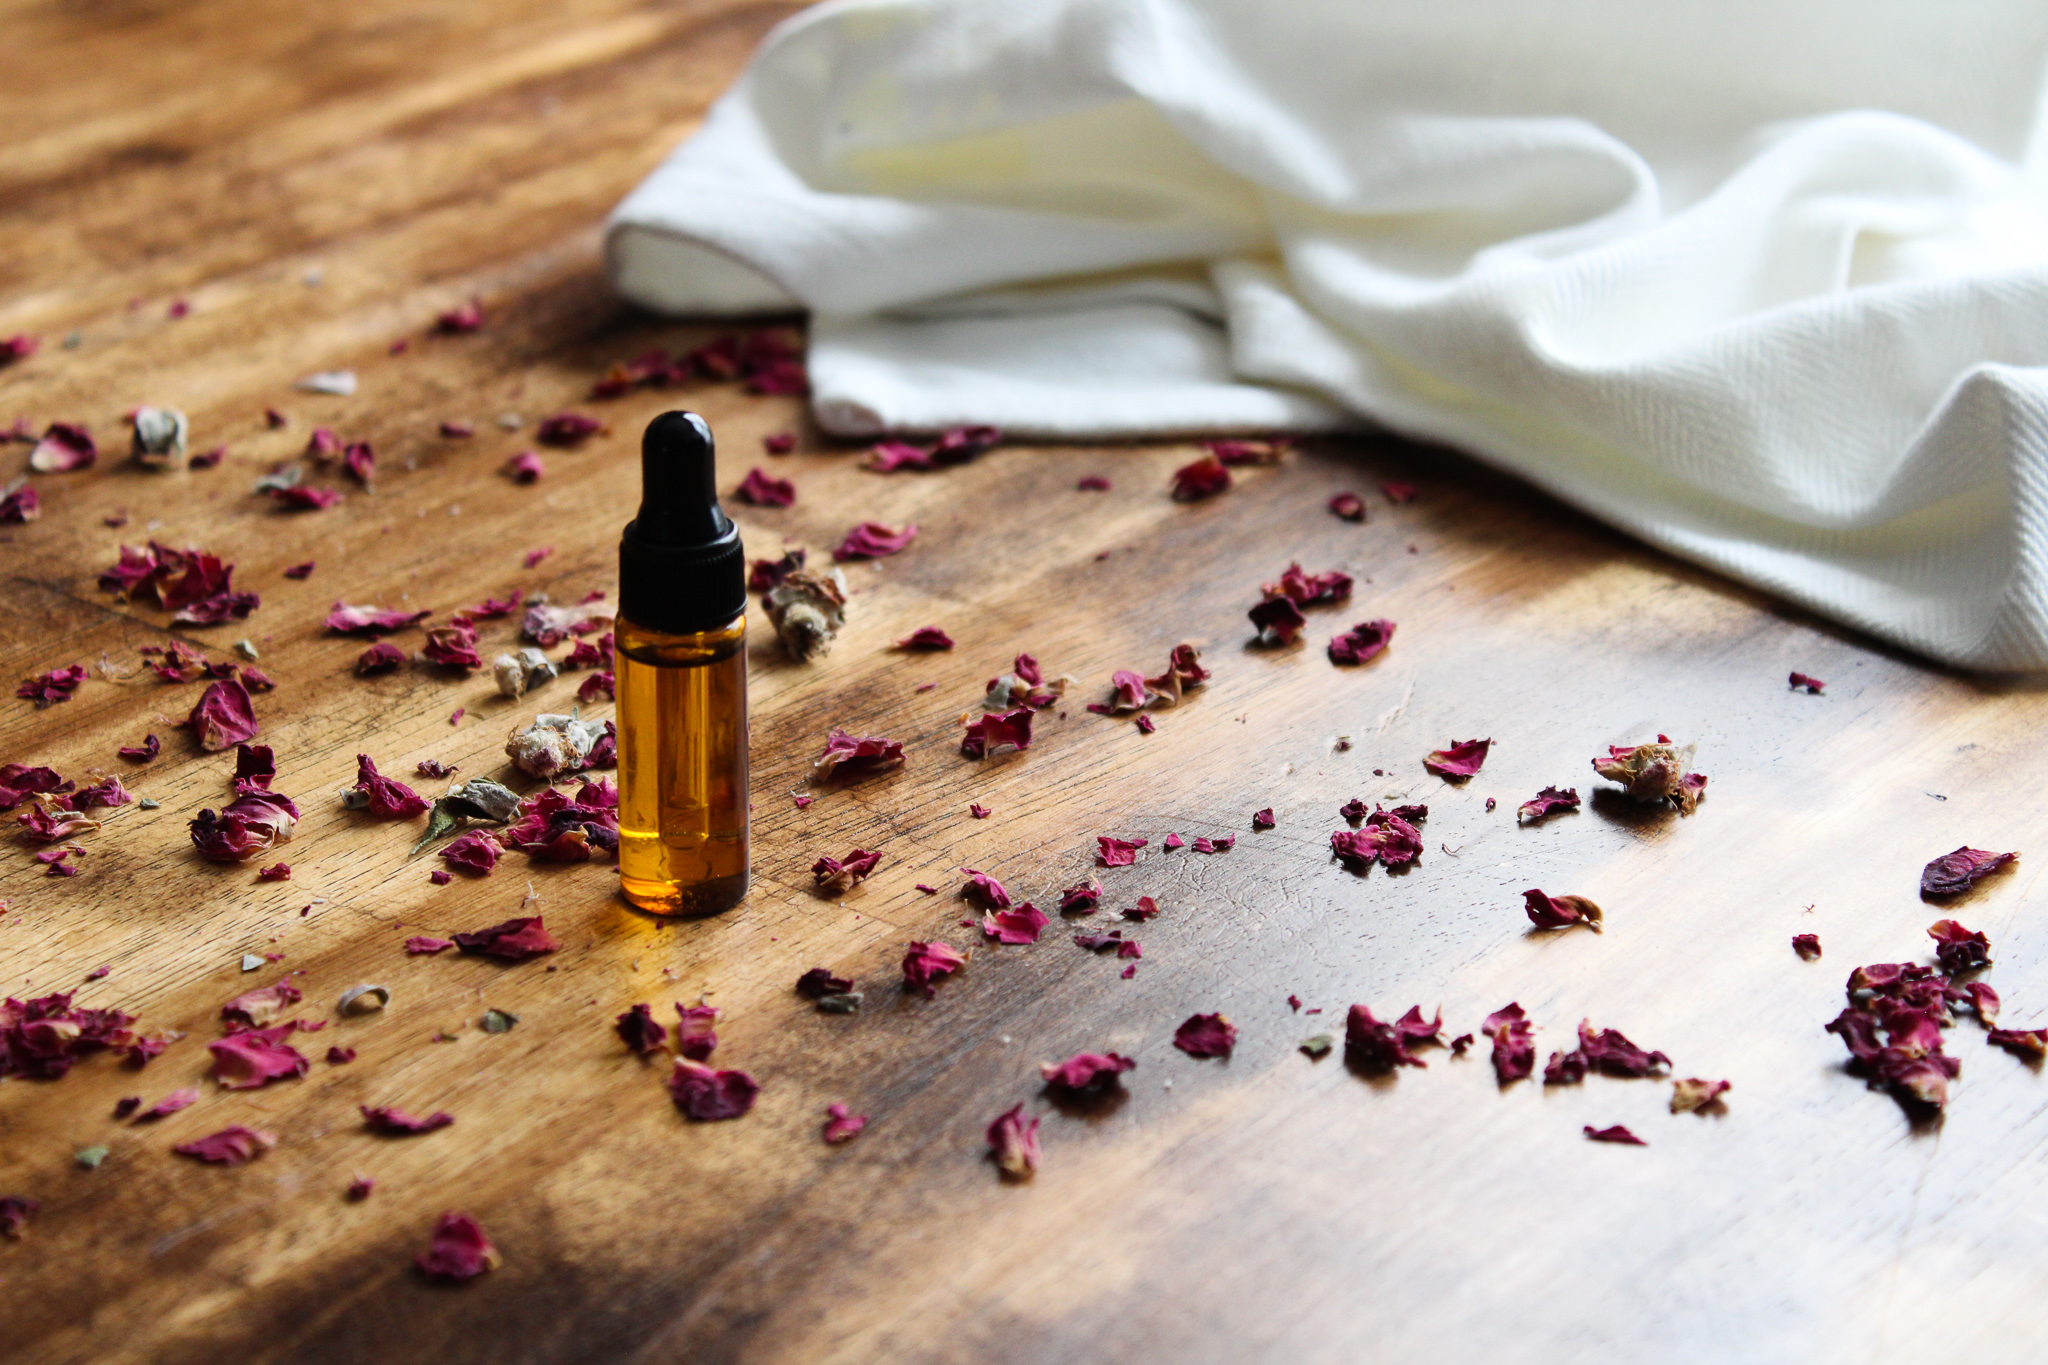 Cuticle oil dropper bottle on the wooden floor surrounded by dried rose petals next to a white cloth.